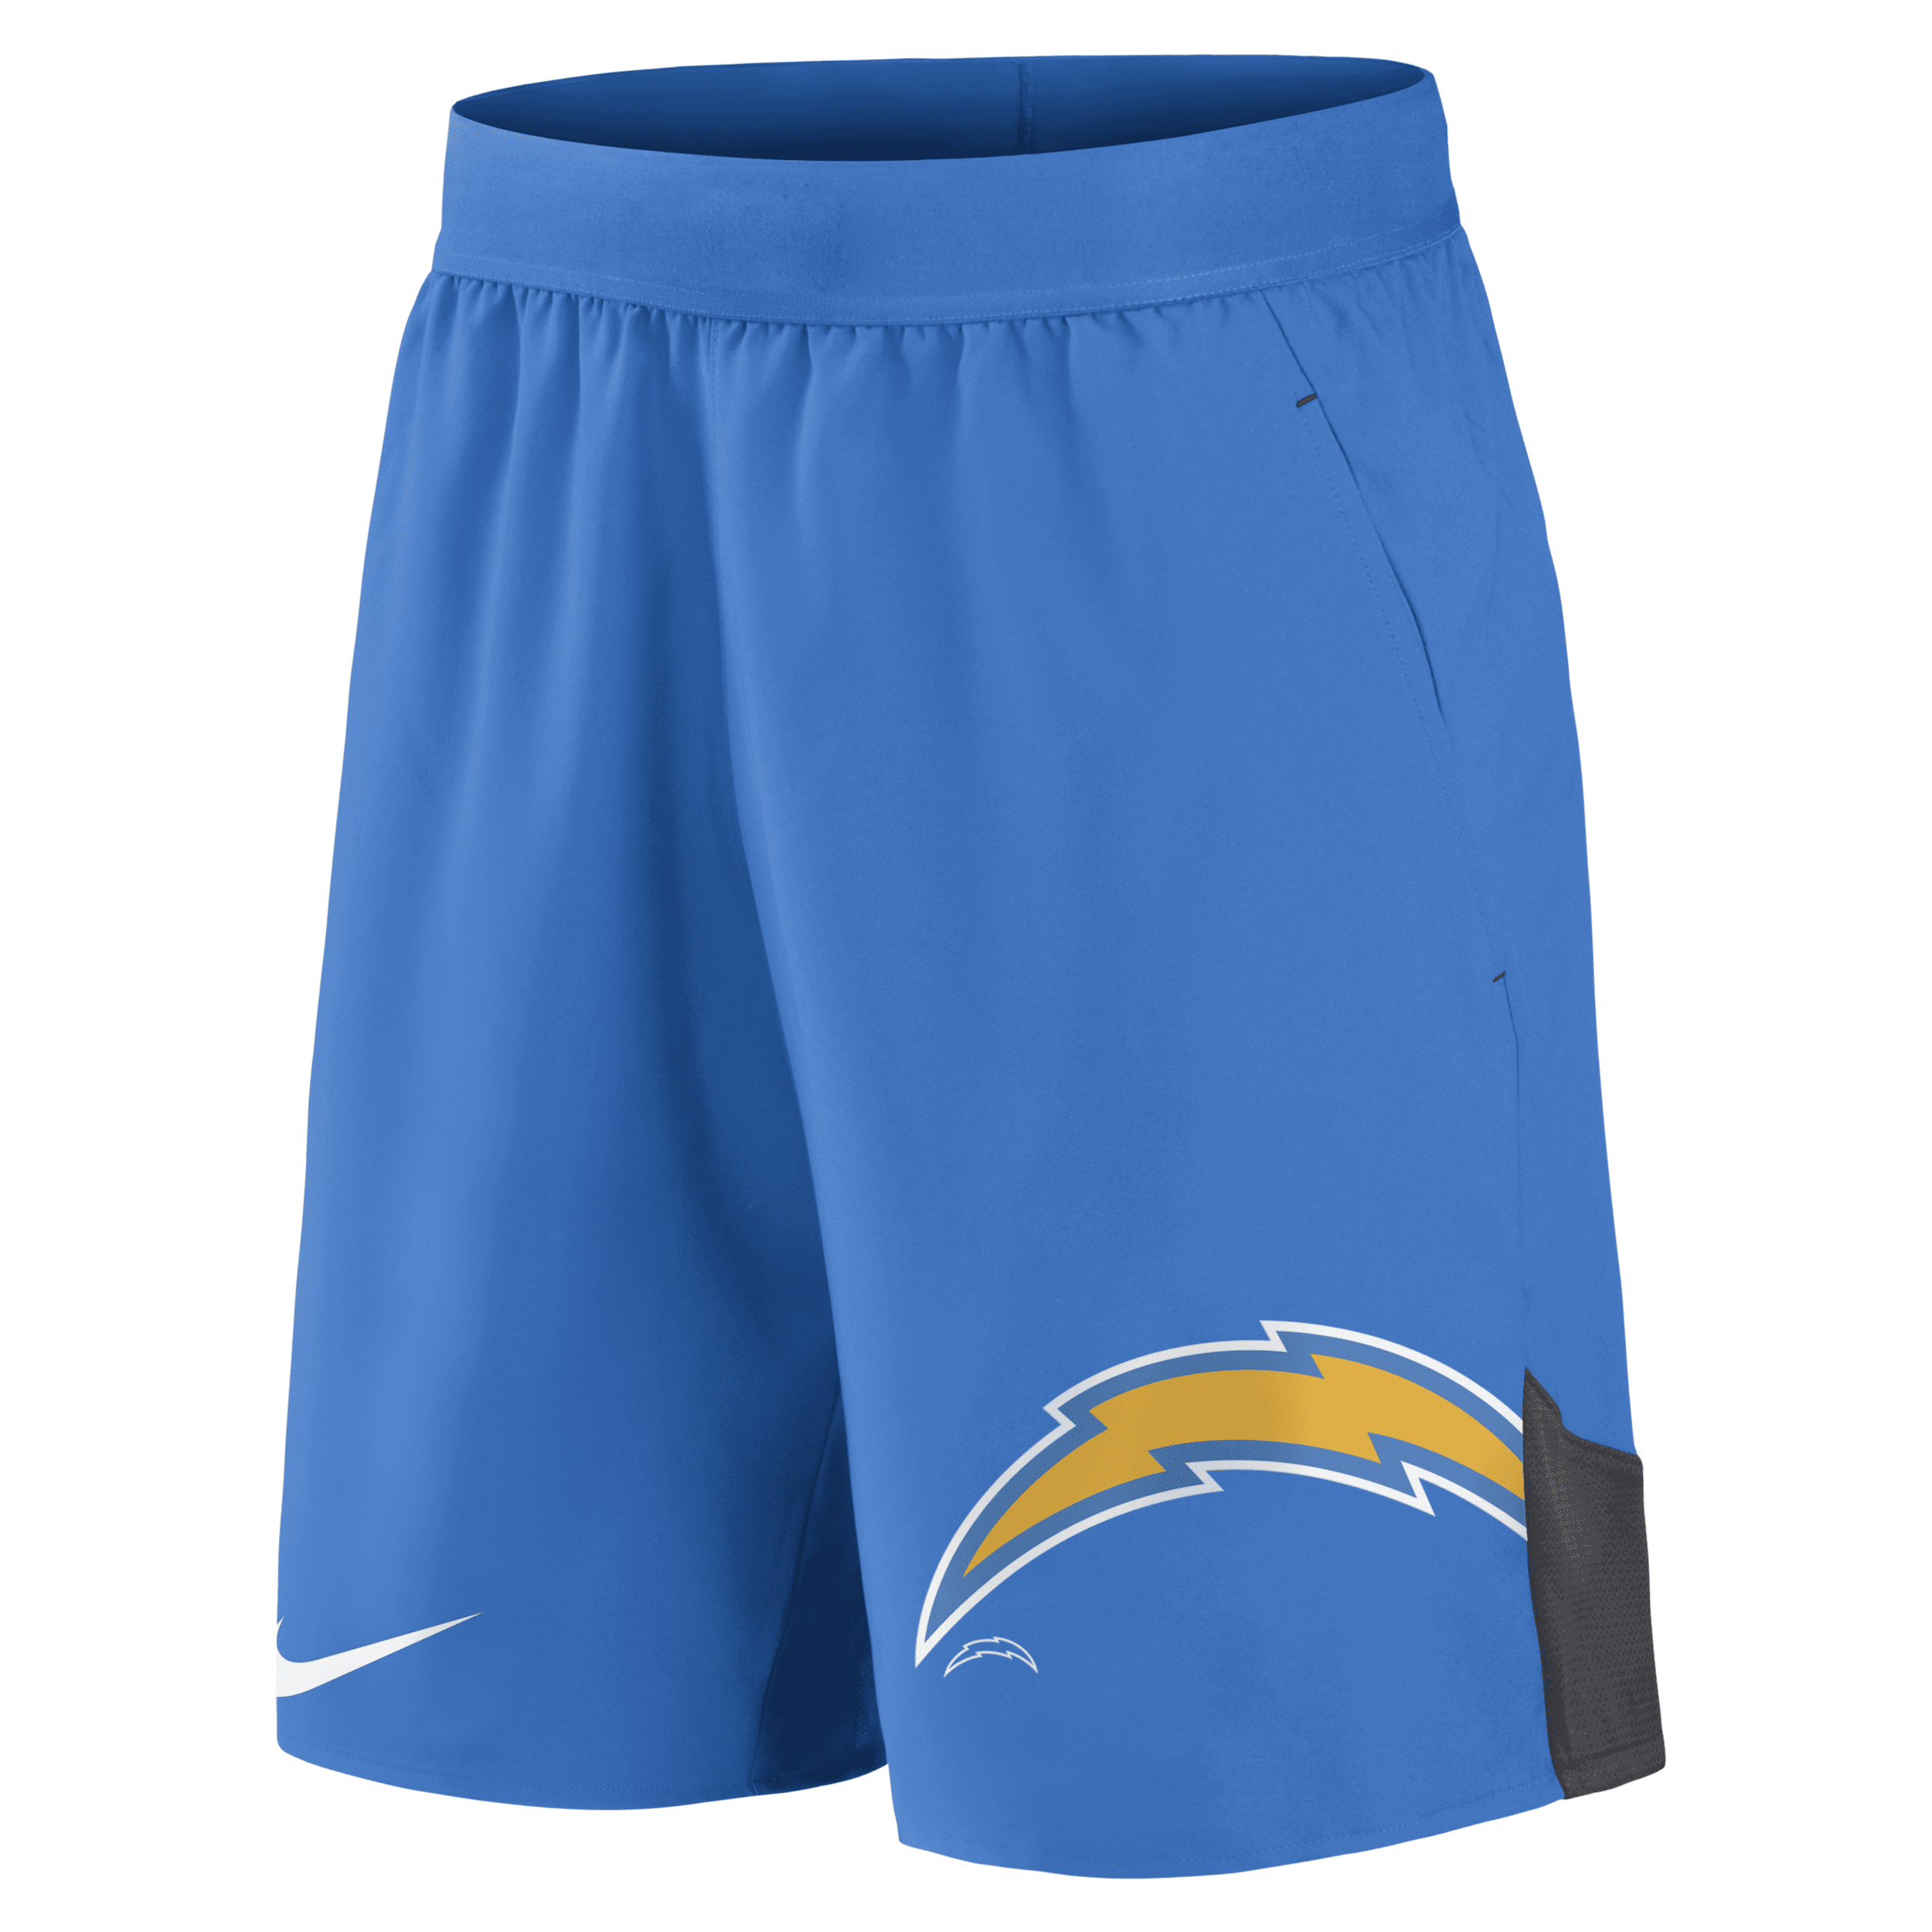 NIKE MEN'S DRI-FIT STRETCH (NFL LOS ANGELES CHARGERS) SHORTS,1013750853